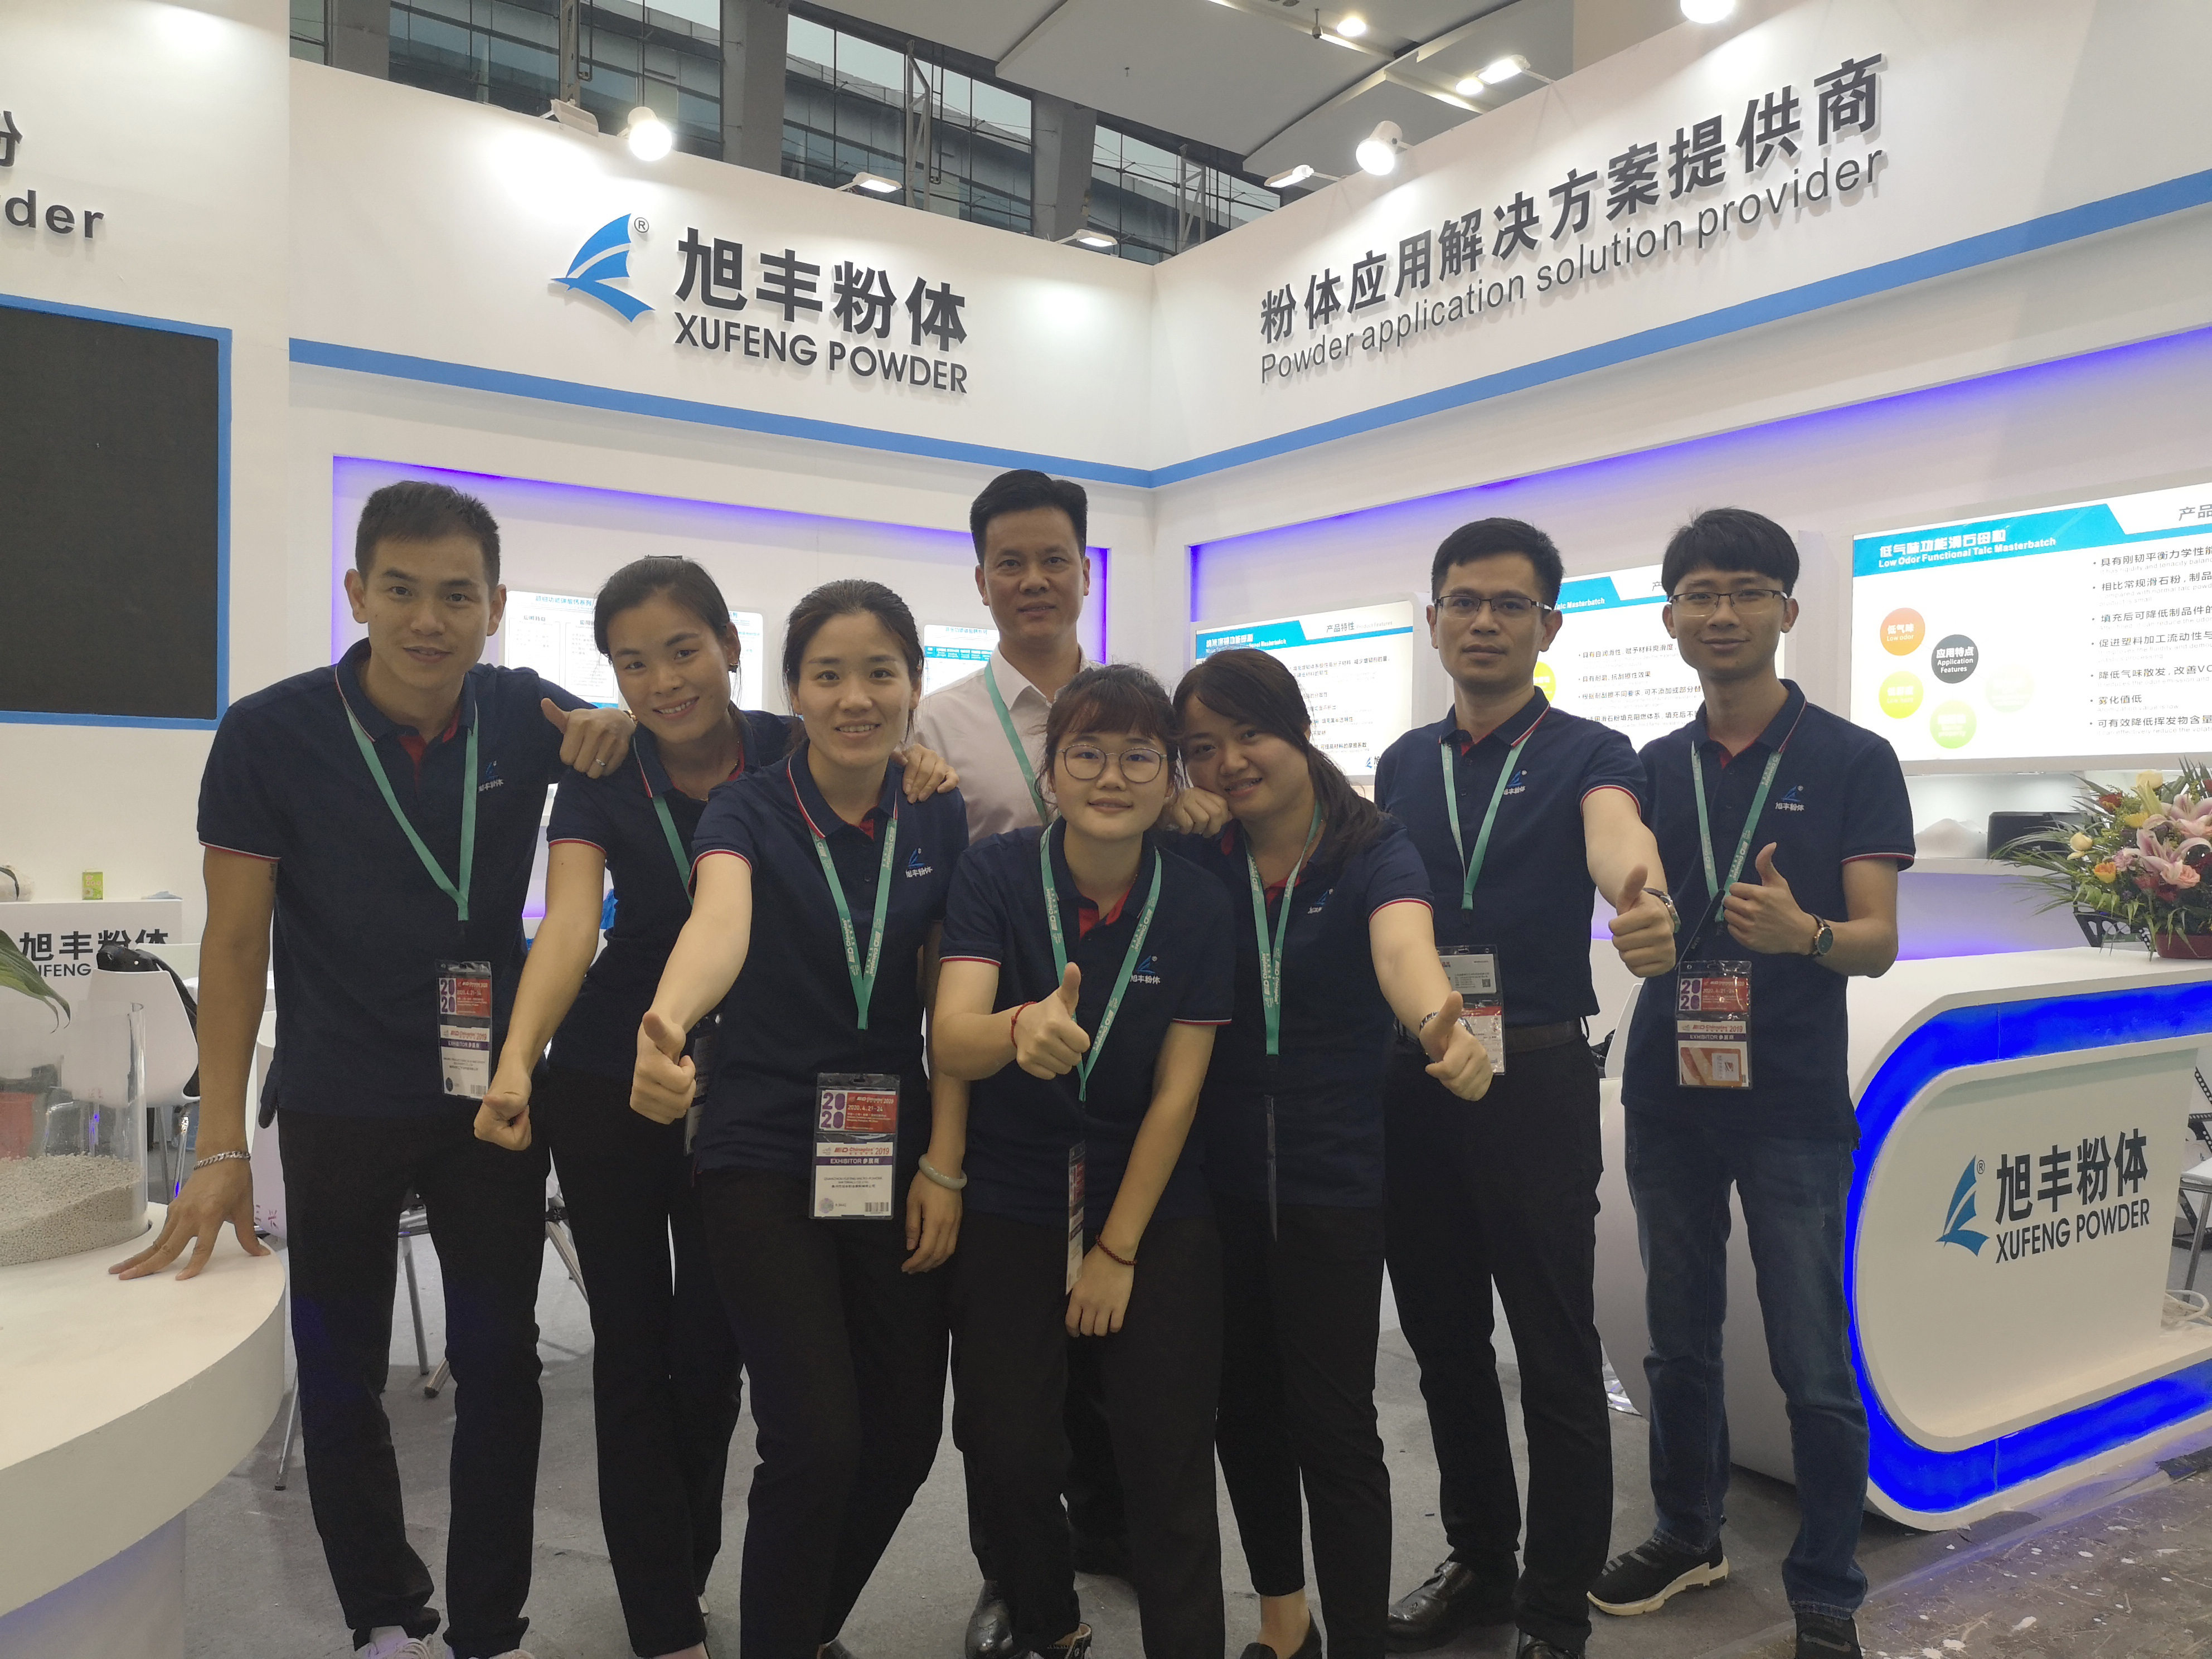 2019 International Rubber Exhibition came to a successful conclusion